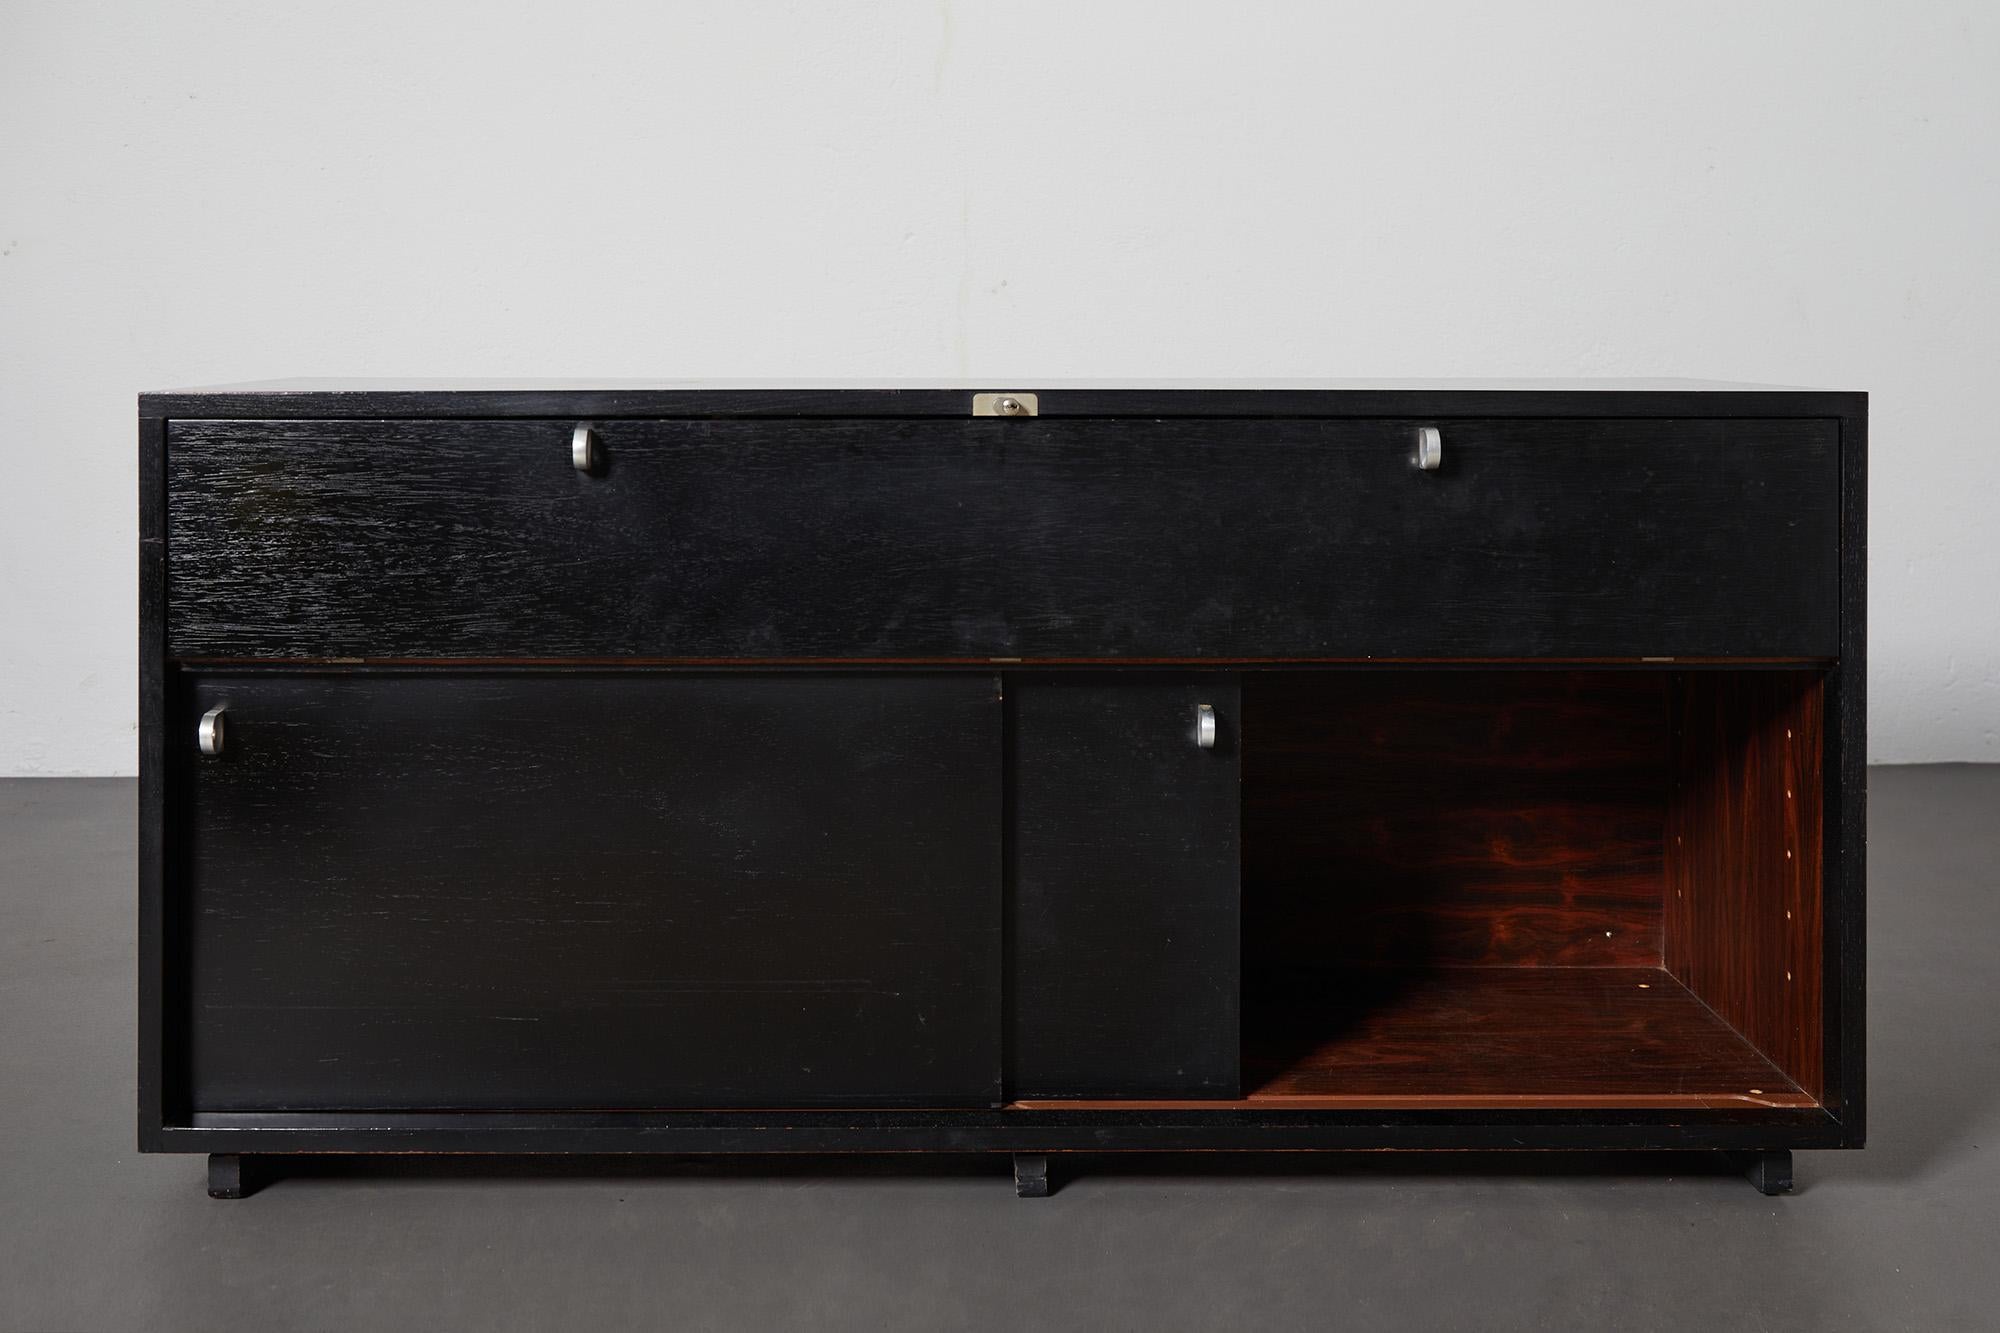 Lacquered Herbert Hirche Executive Sideboard Top Series by Christian Holzäpfel, 1967